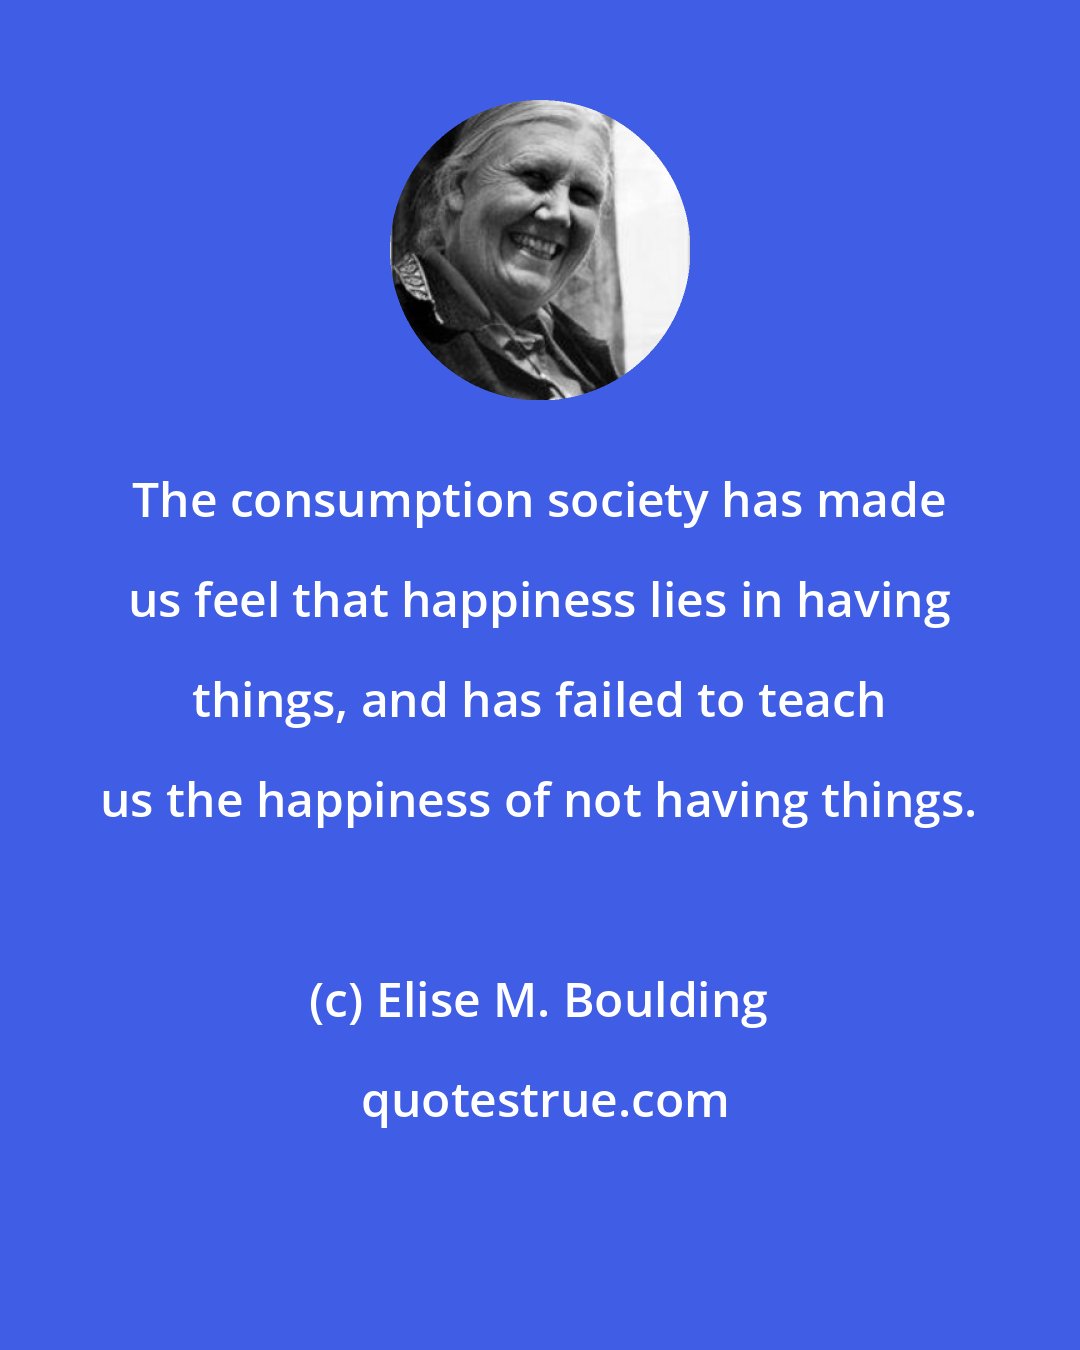 Elise M. Boulding: The consumption society has made us feel that happiness lies in having things, and has failed to teach us the happiness of not having things.